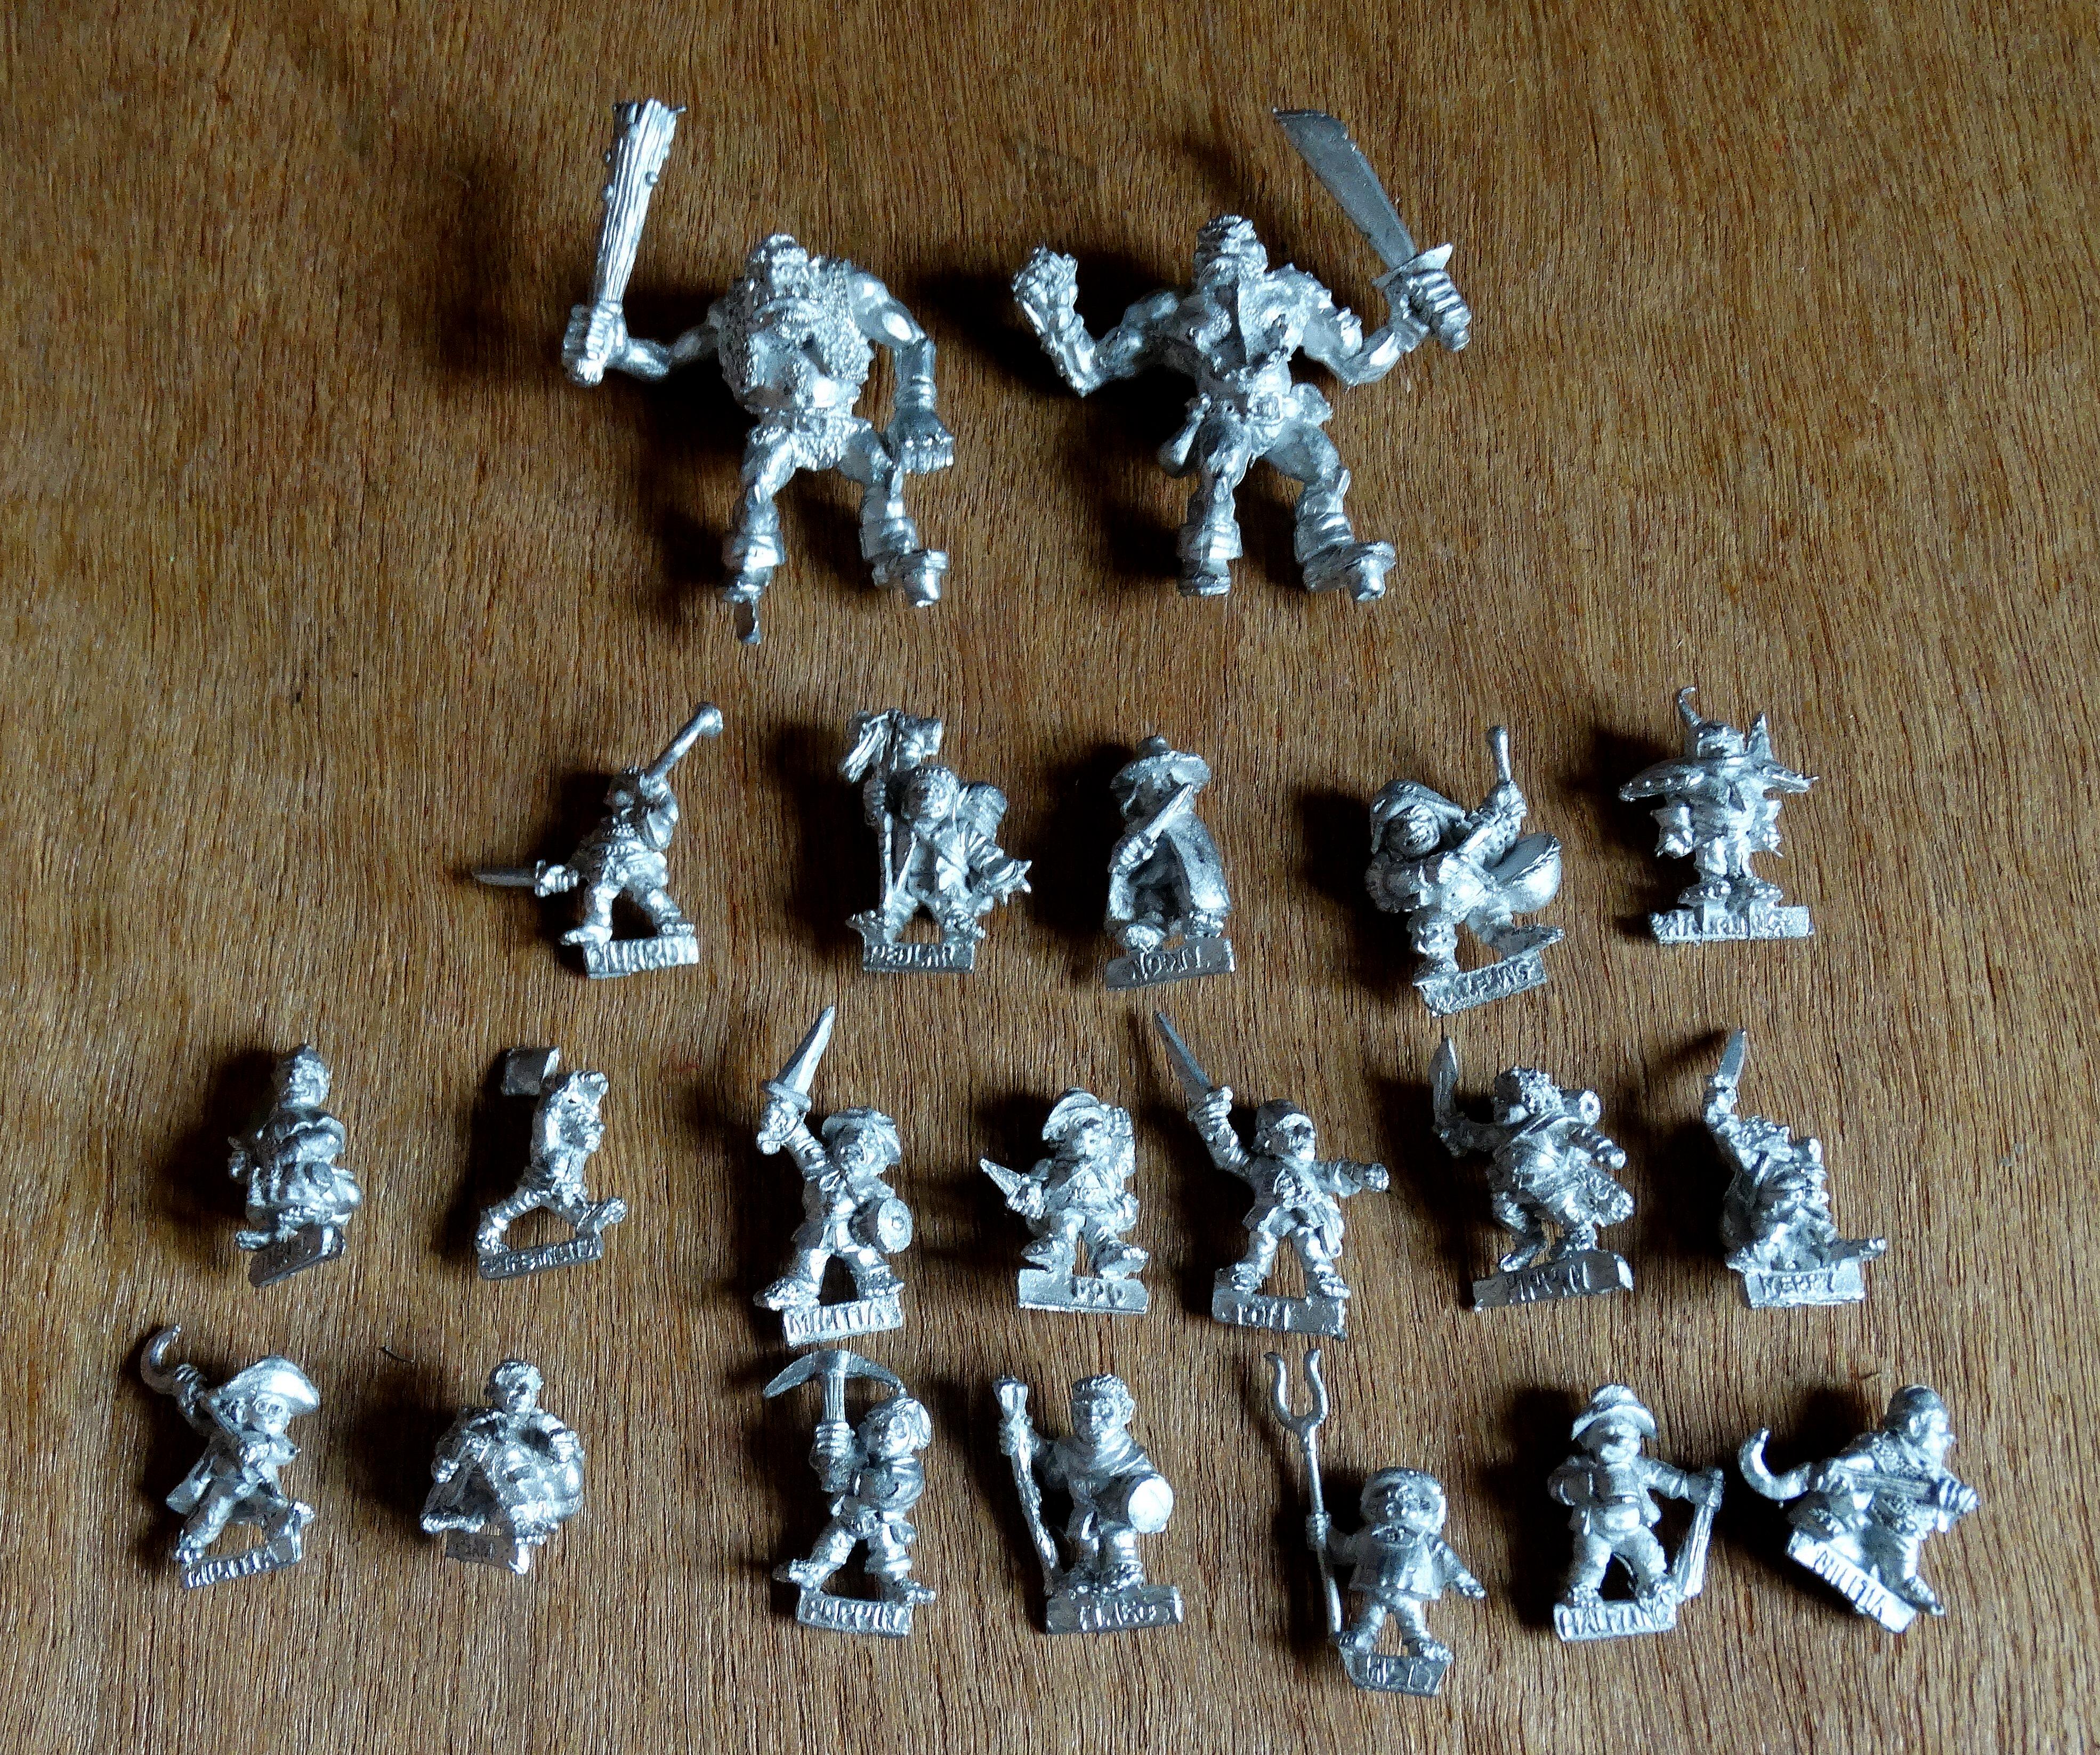 Empire, Halflings, Out Of Production, Warhammer Fantasy